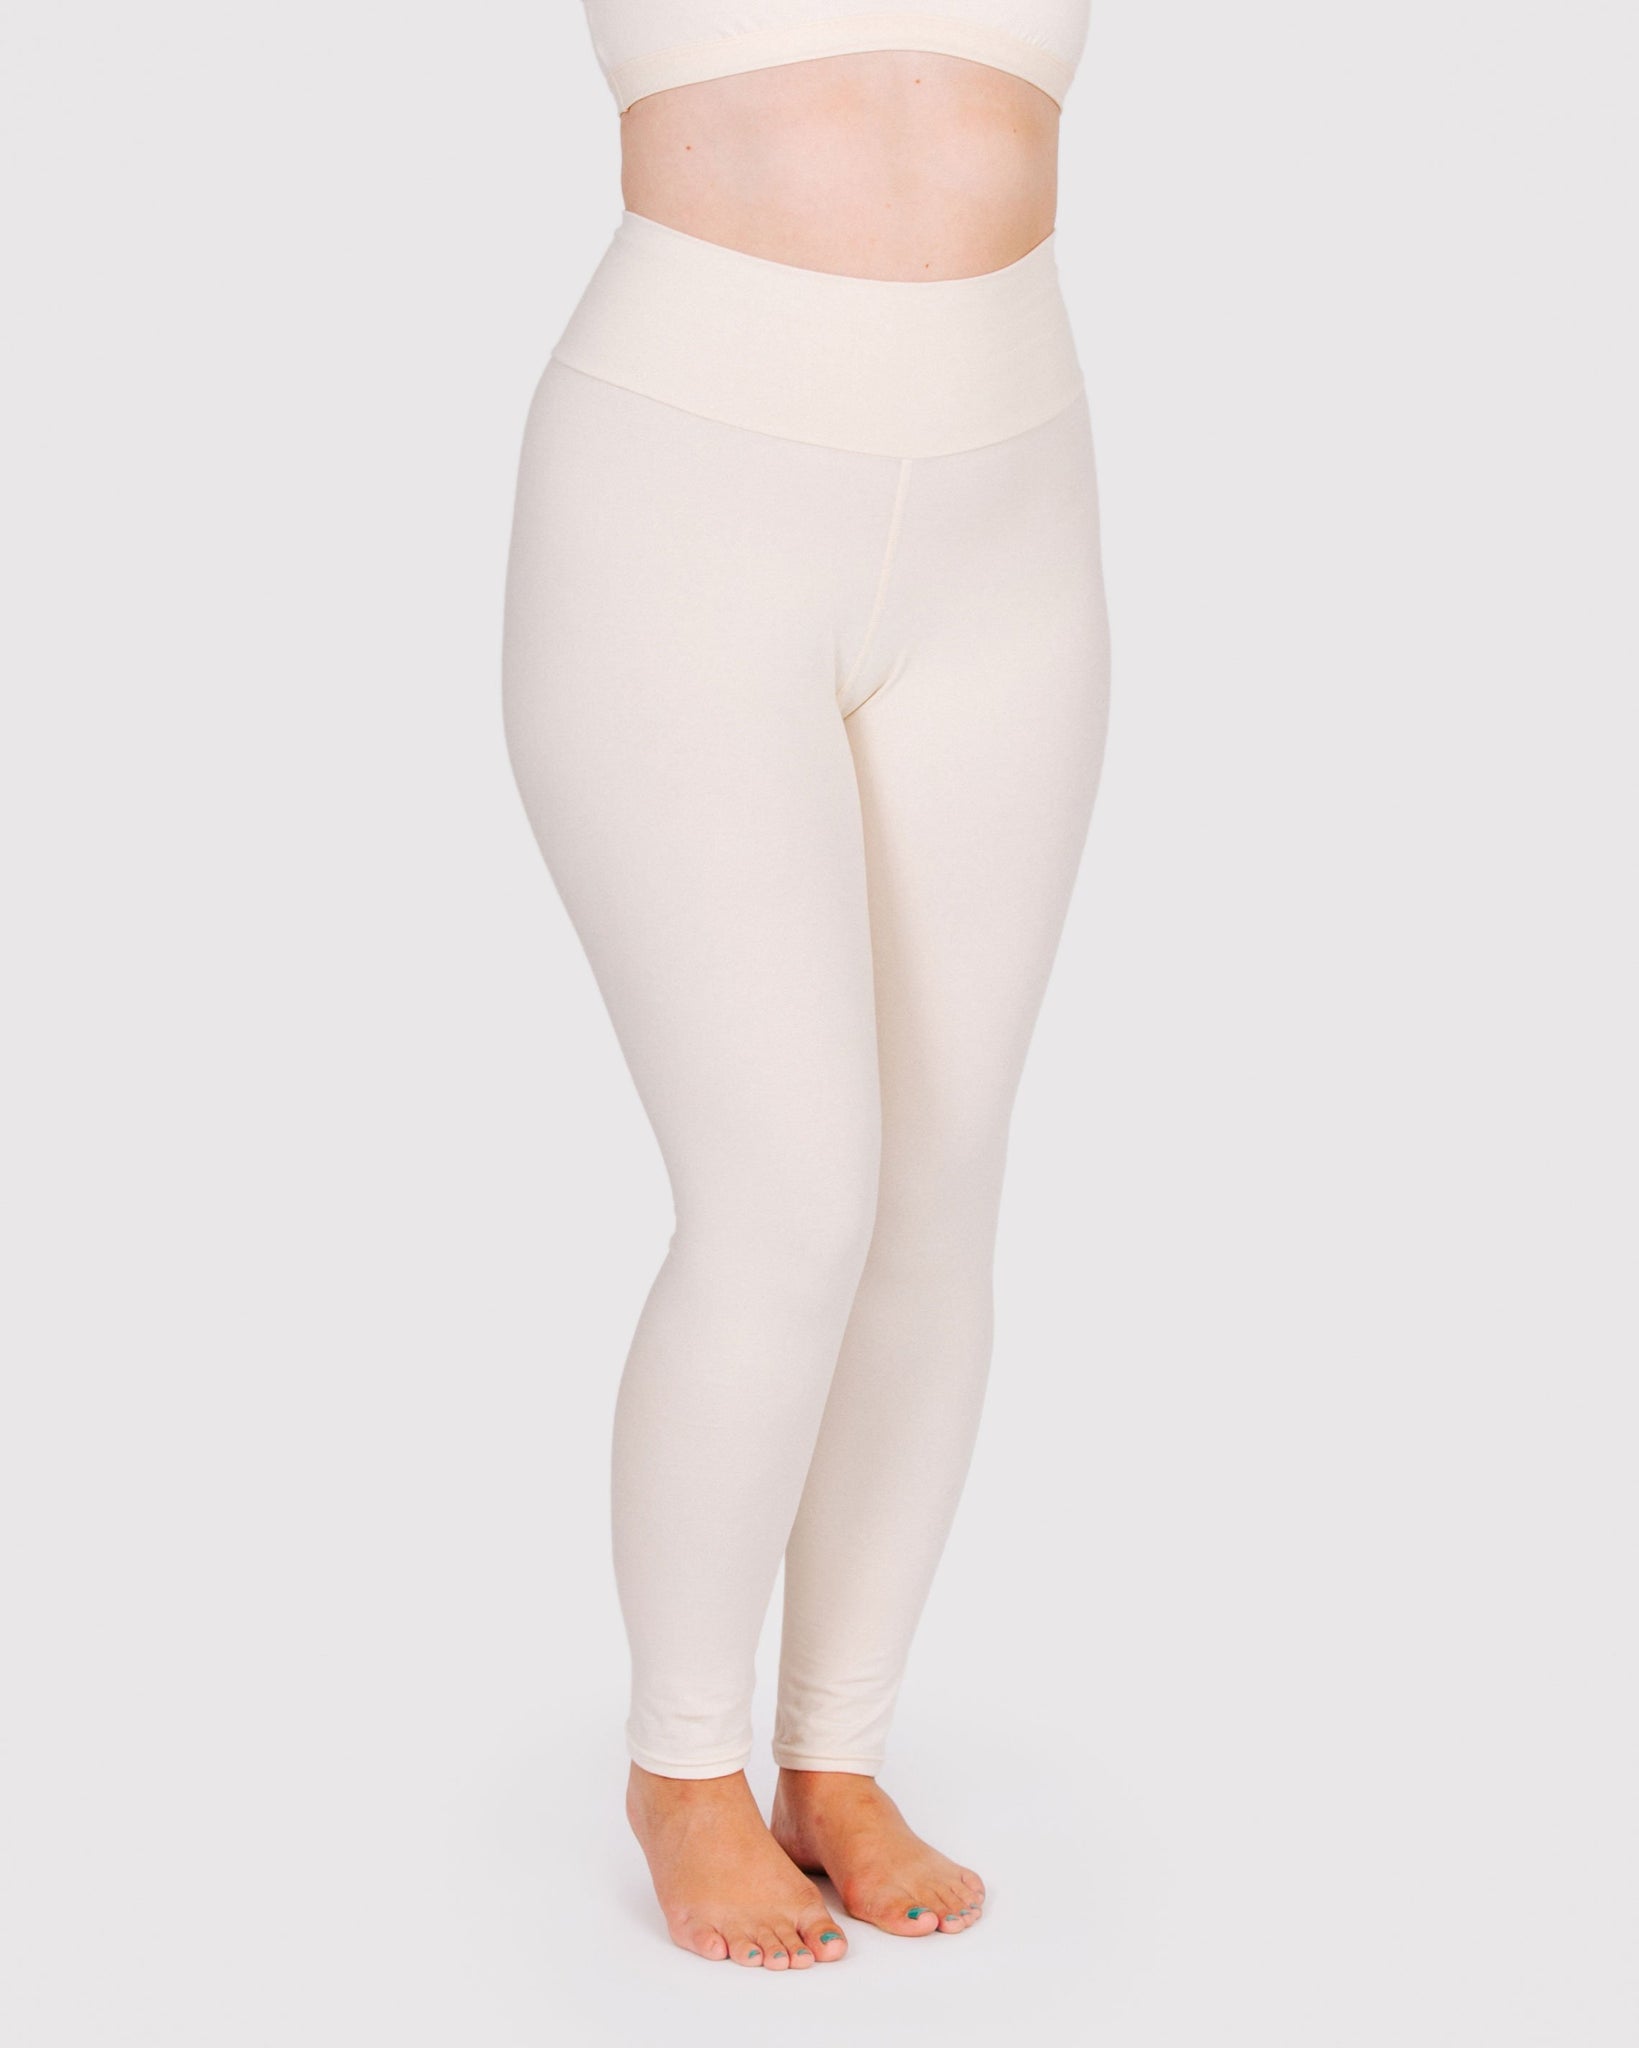 Happy Never Looked Better High Waisted Ankle Leggings | Zumba Shop SEAZumba  Shop SEA